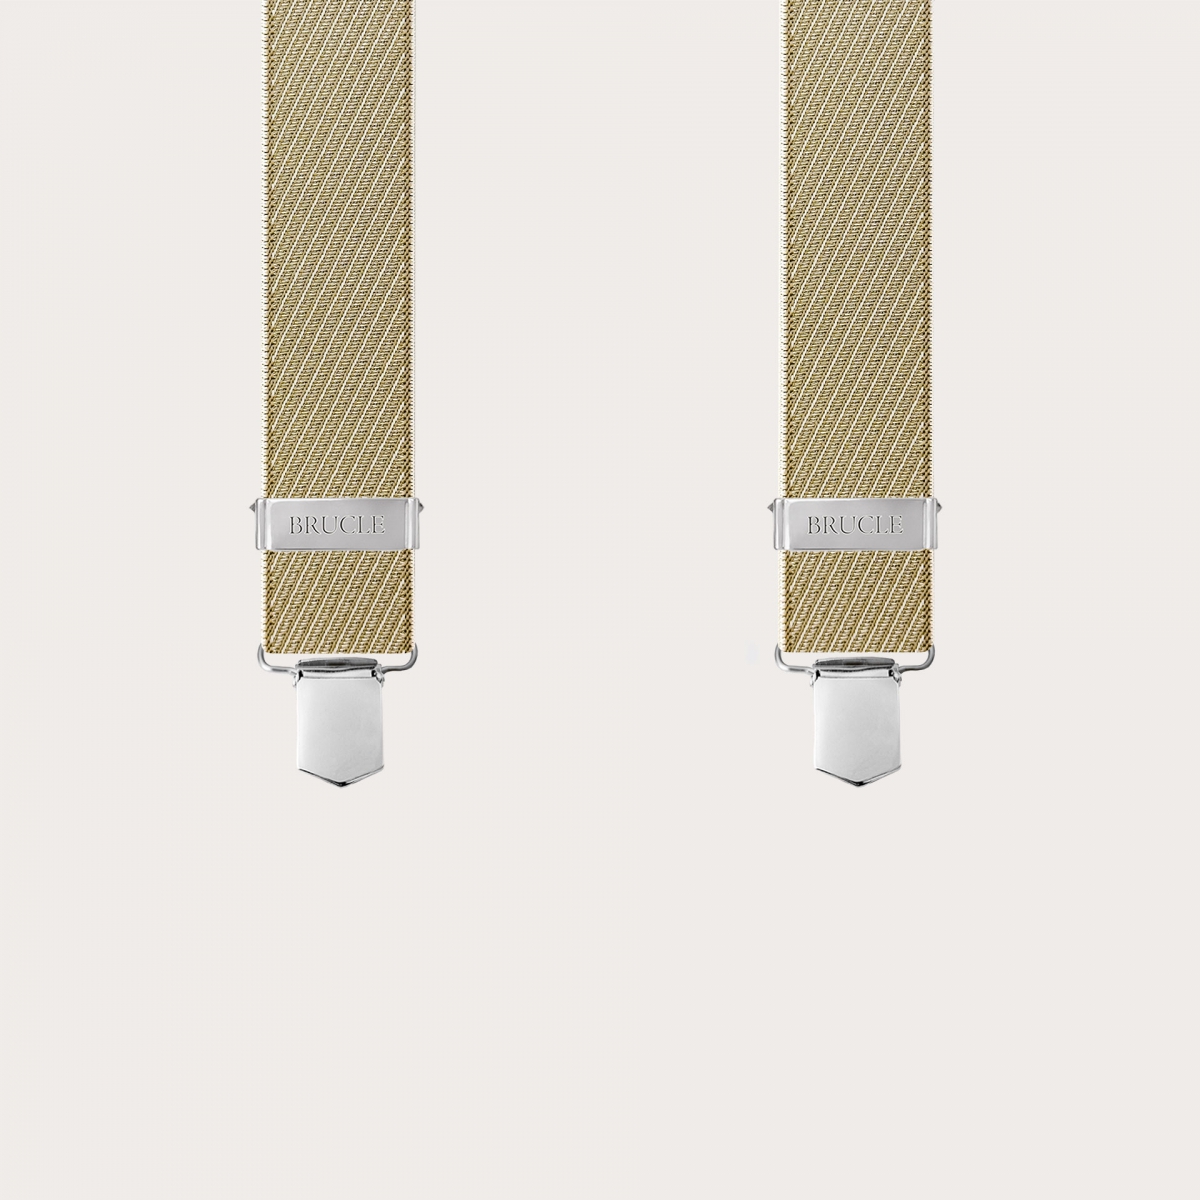 Striped gold and beige elastic suspenders with clips